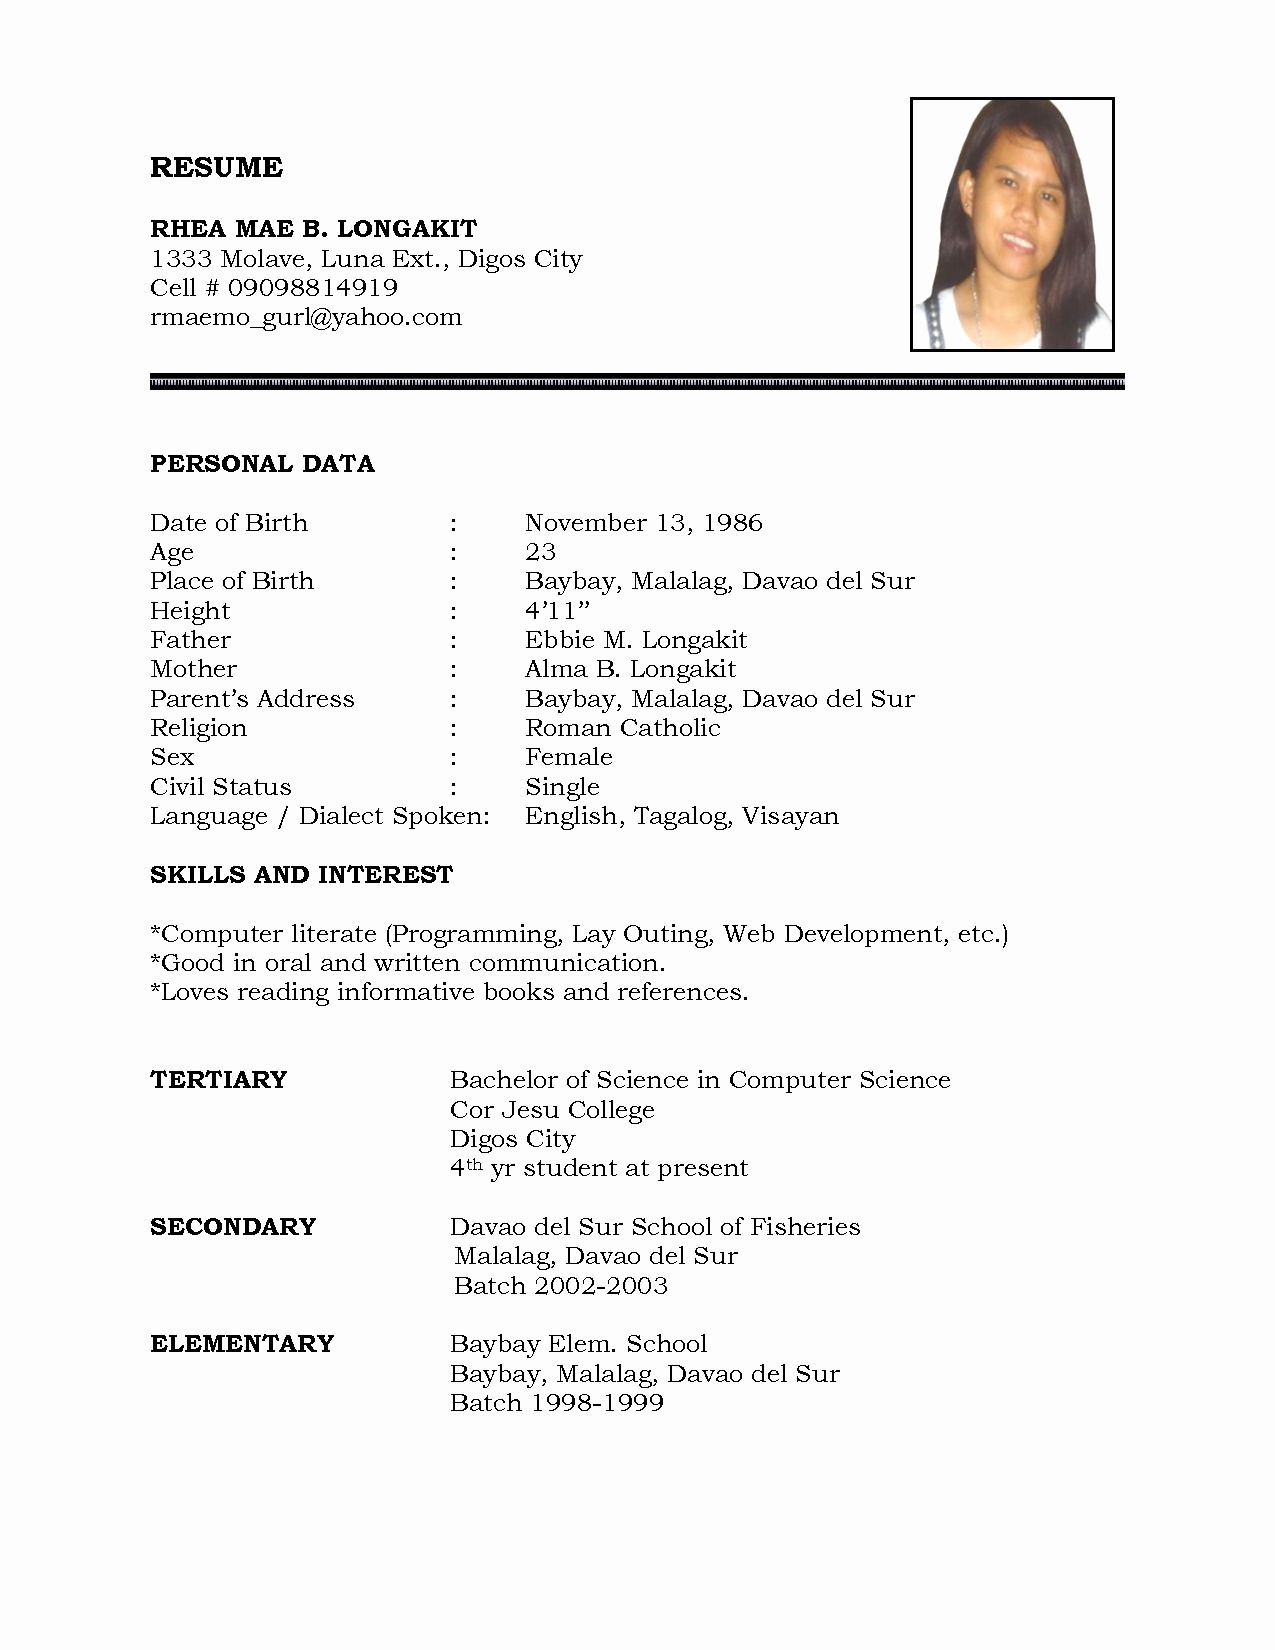 Samples Of A Basic Resume Inspirational Resume Sample Simple De9e2a60f the Simple format Resume